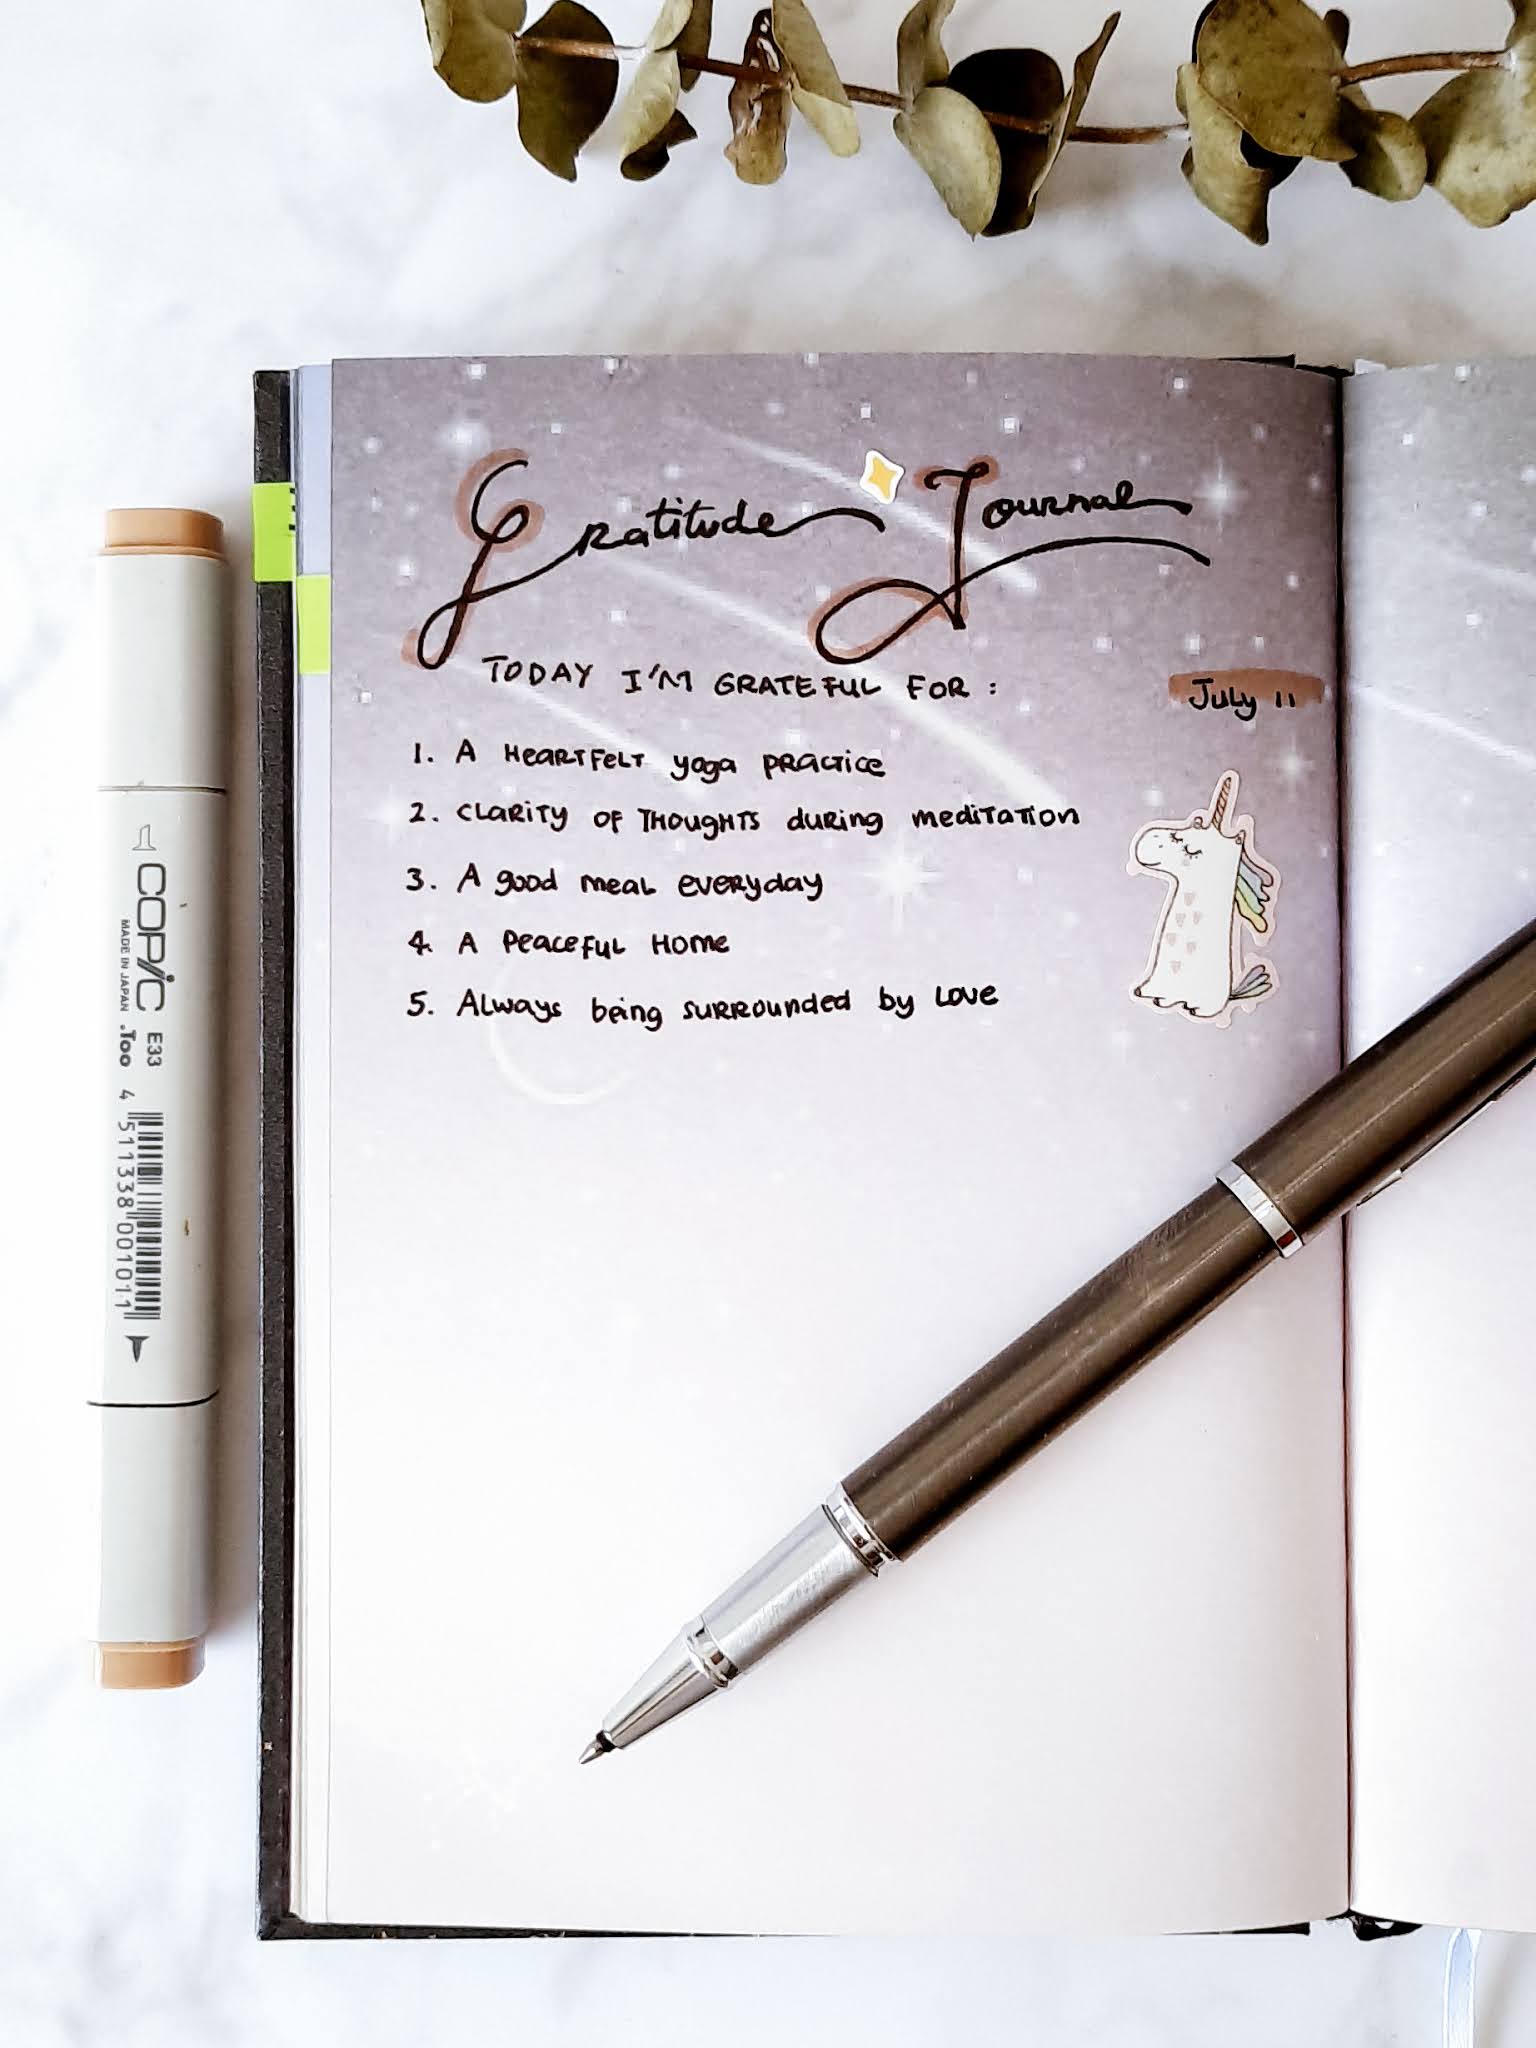 gratitude journal  how to start one - Style Frontier